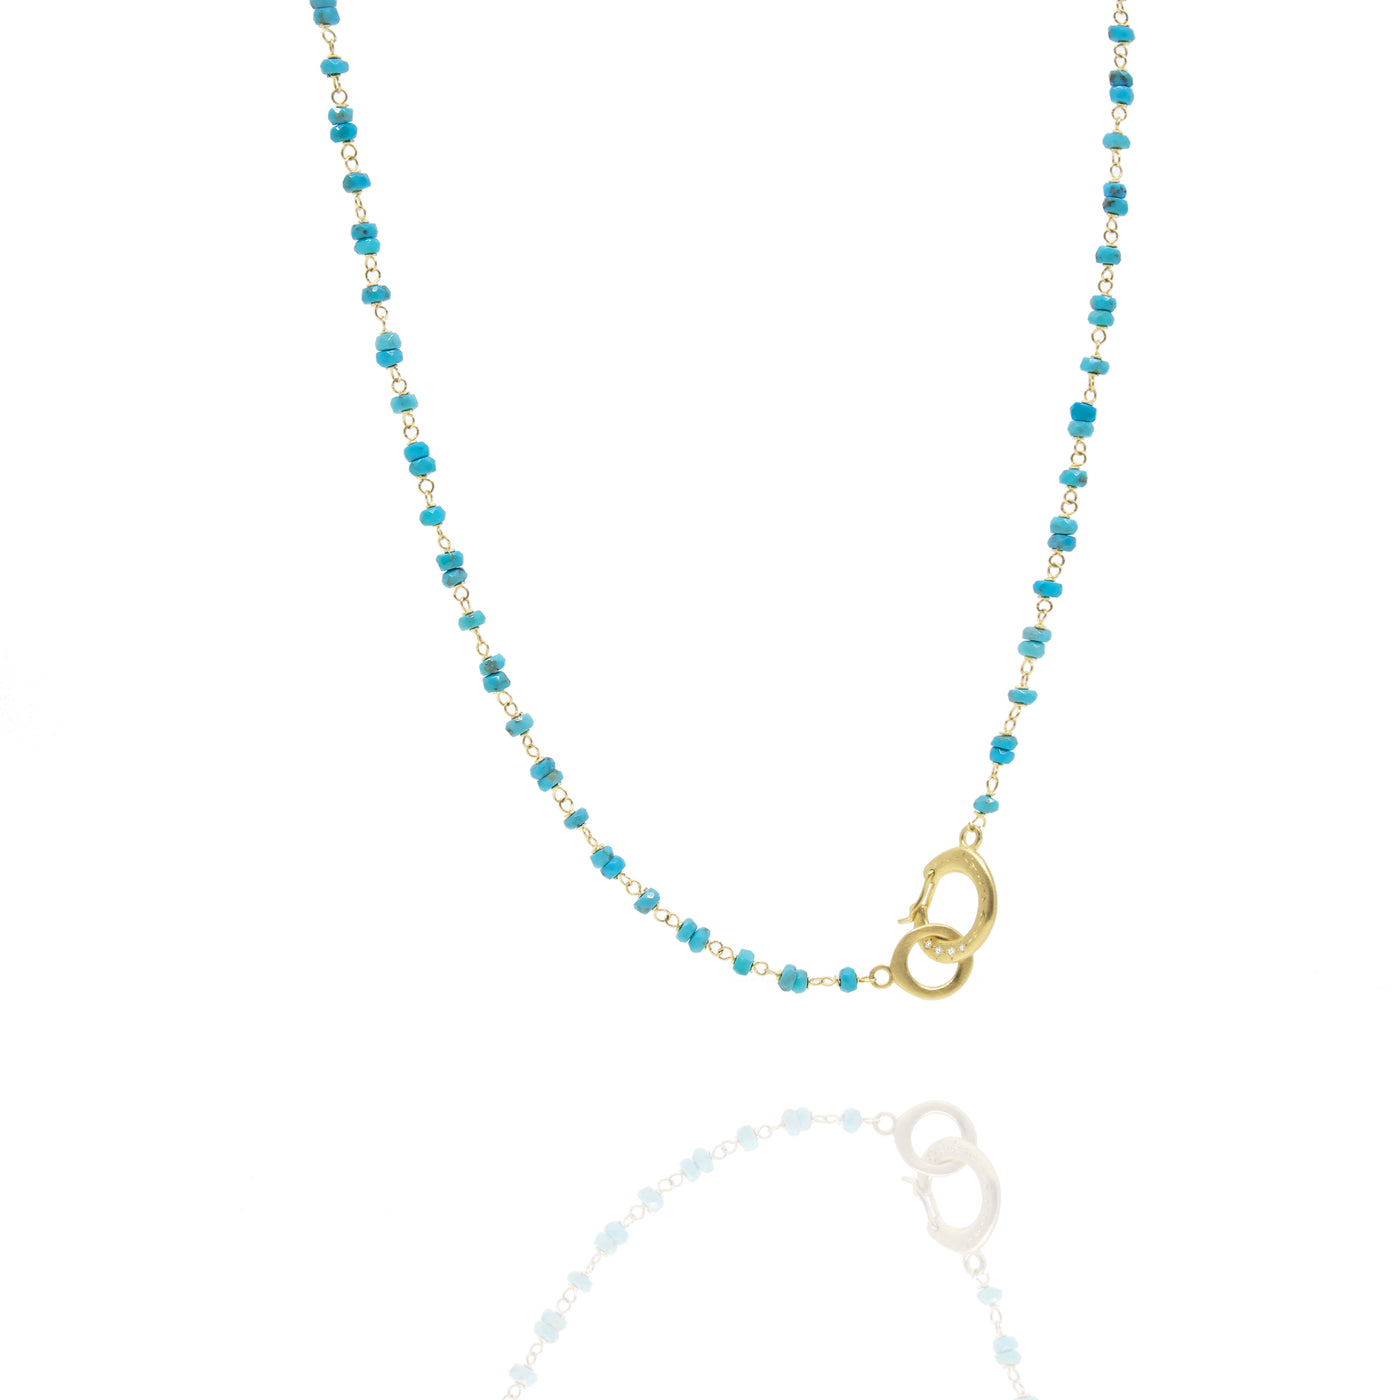 28" Turquoise Beaded Necklace